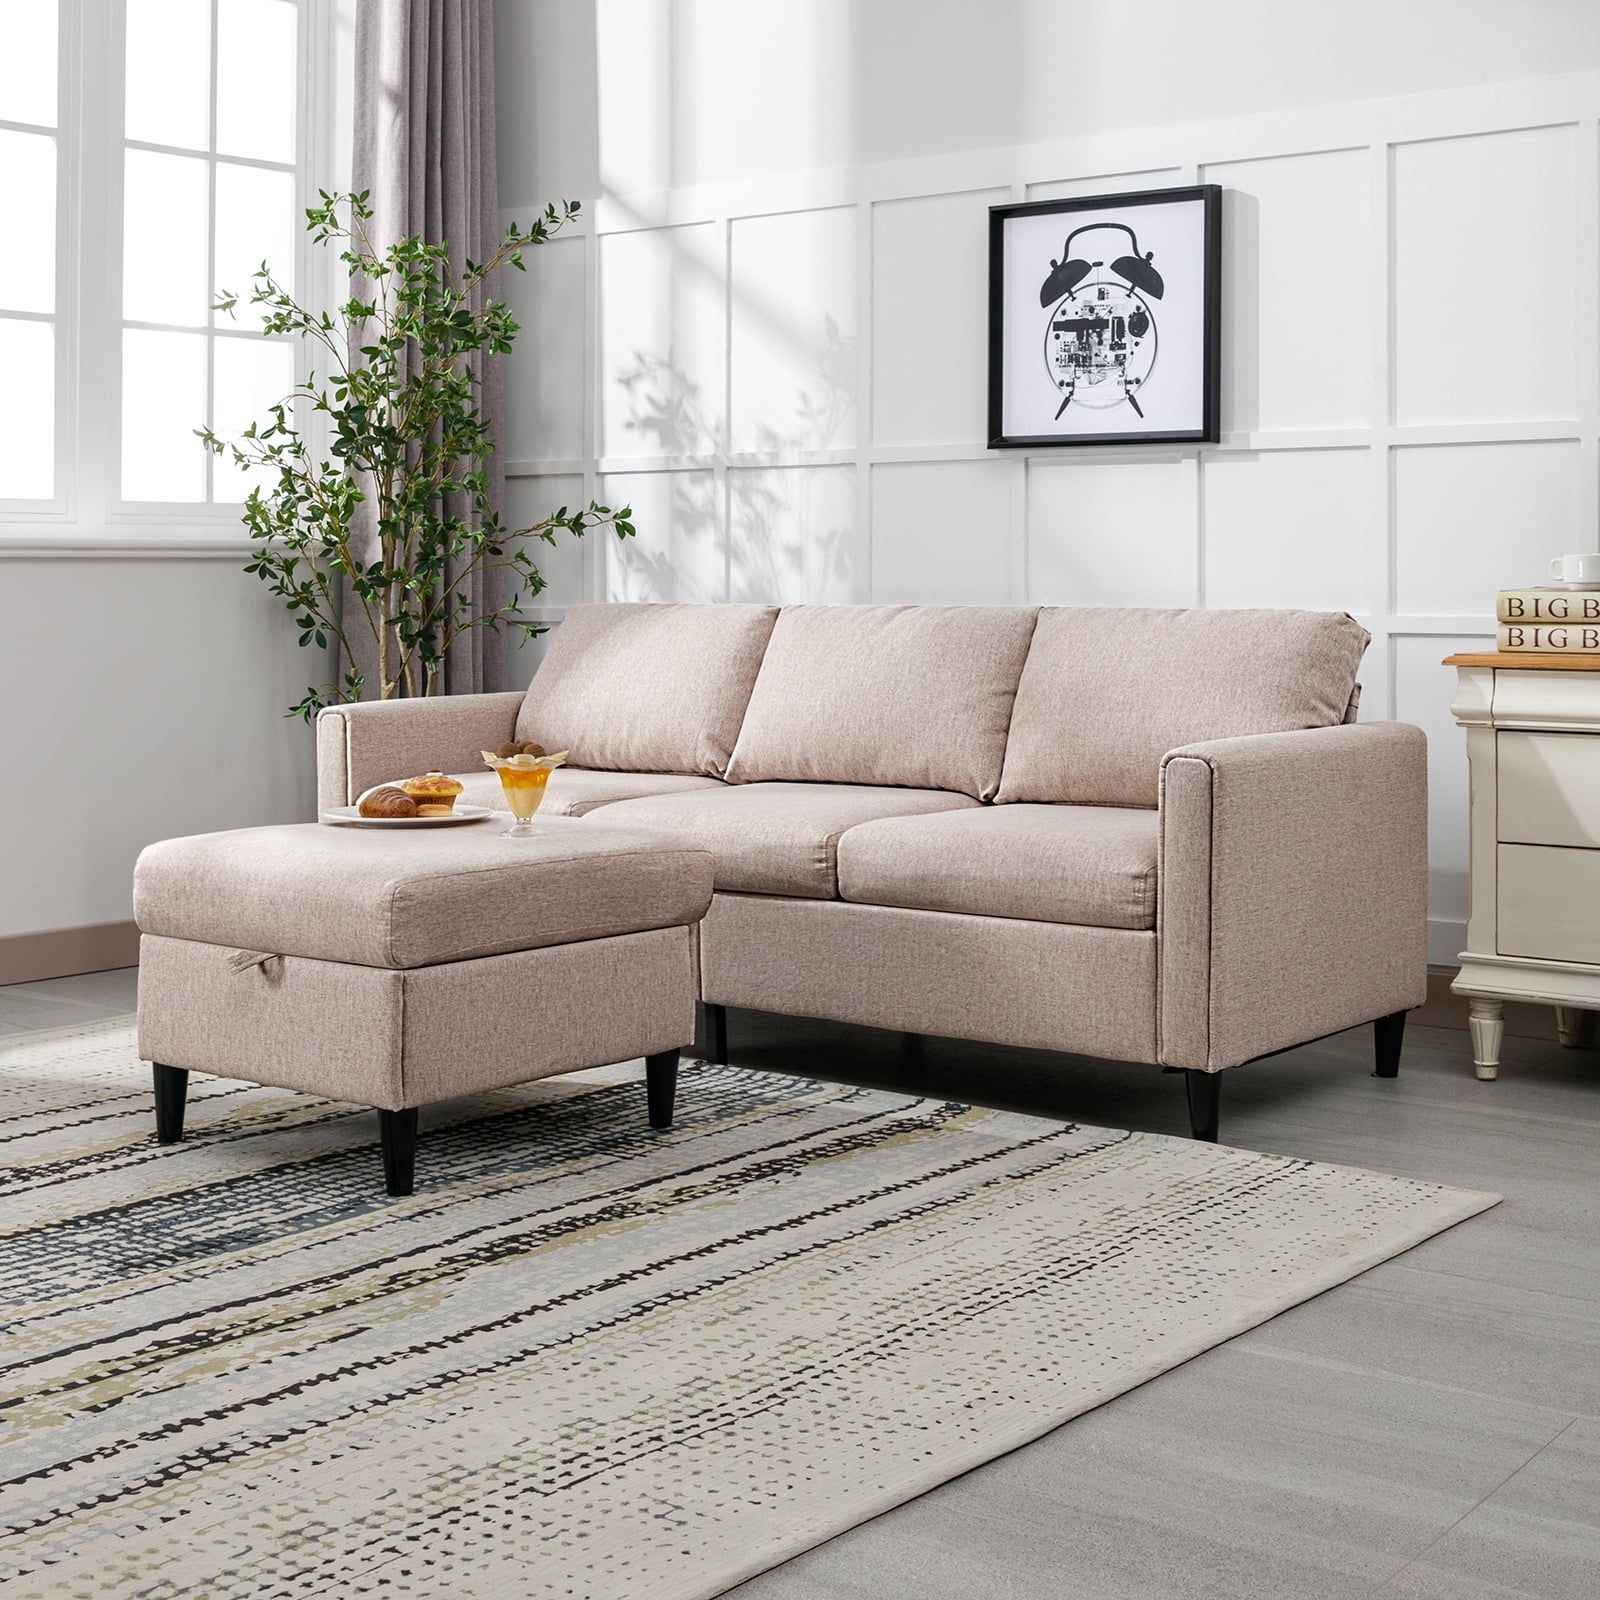 Zafly Convertible Sectional Sofa Couch, 3 Seat Upholstered Sofa With  Flexible Storage Ottoman Chaise, Modern Modular L Shape Couches For Living  Room/office – Beige – Walmart Inside 3 Seat Convertible Sectional Sofas (View 2 of 15)